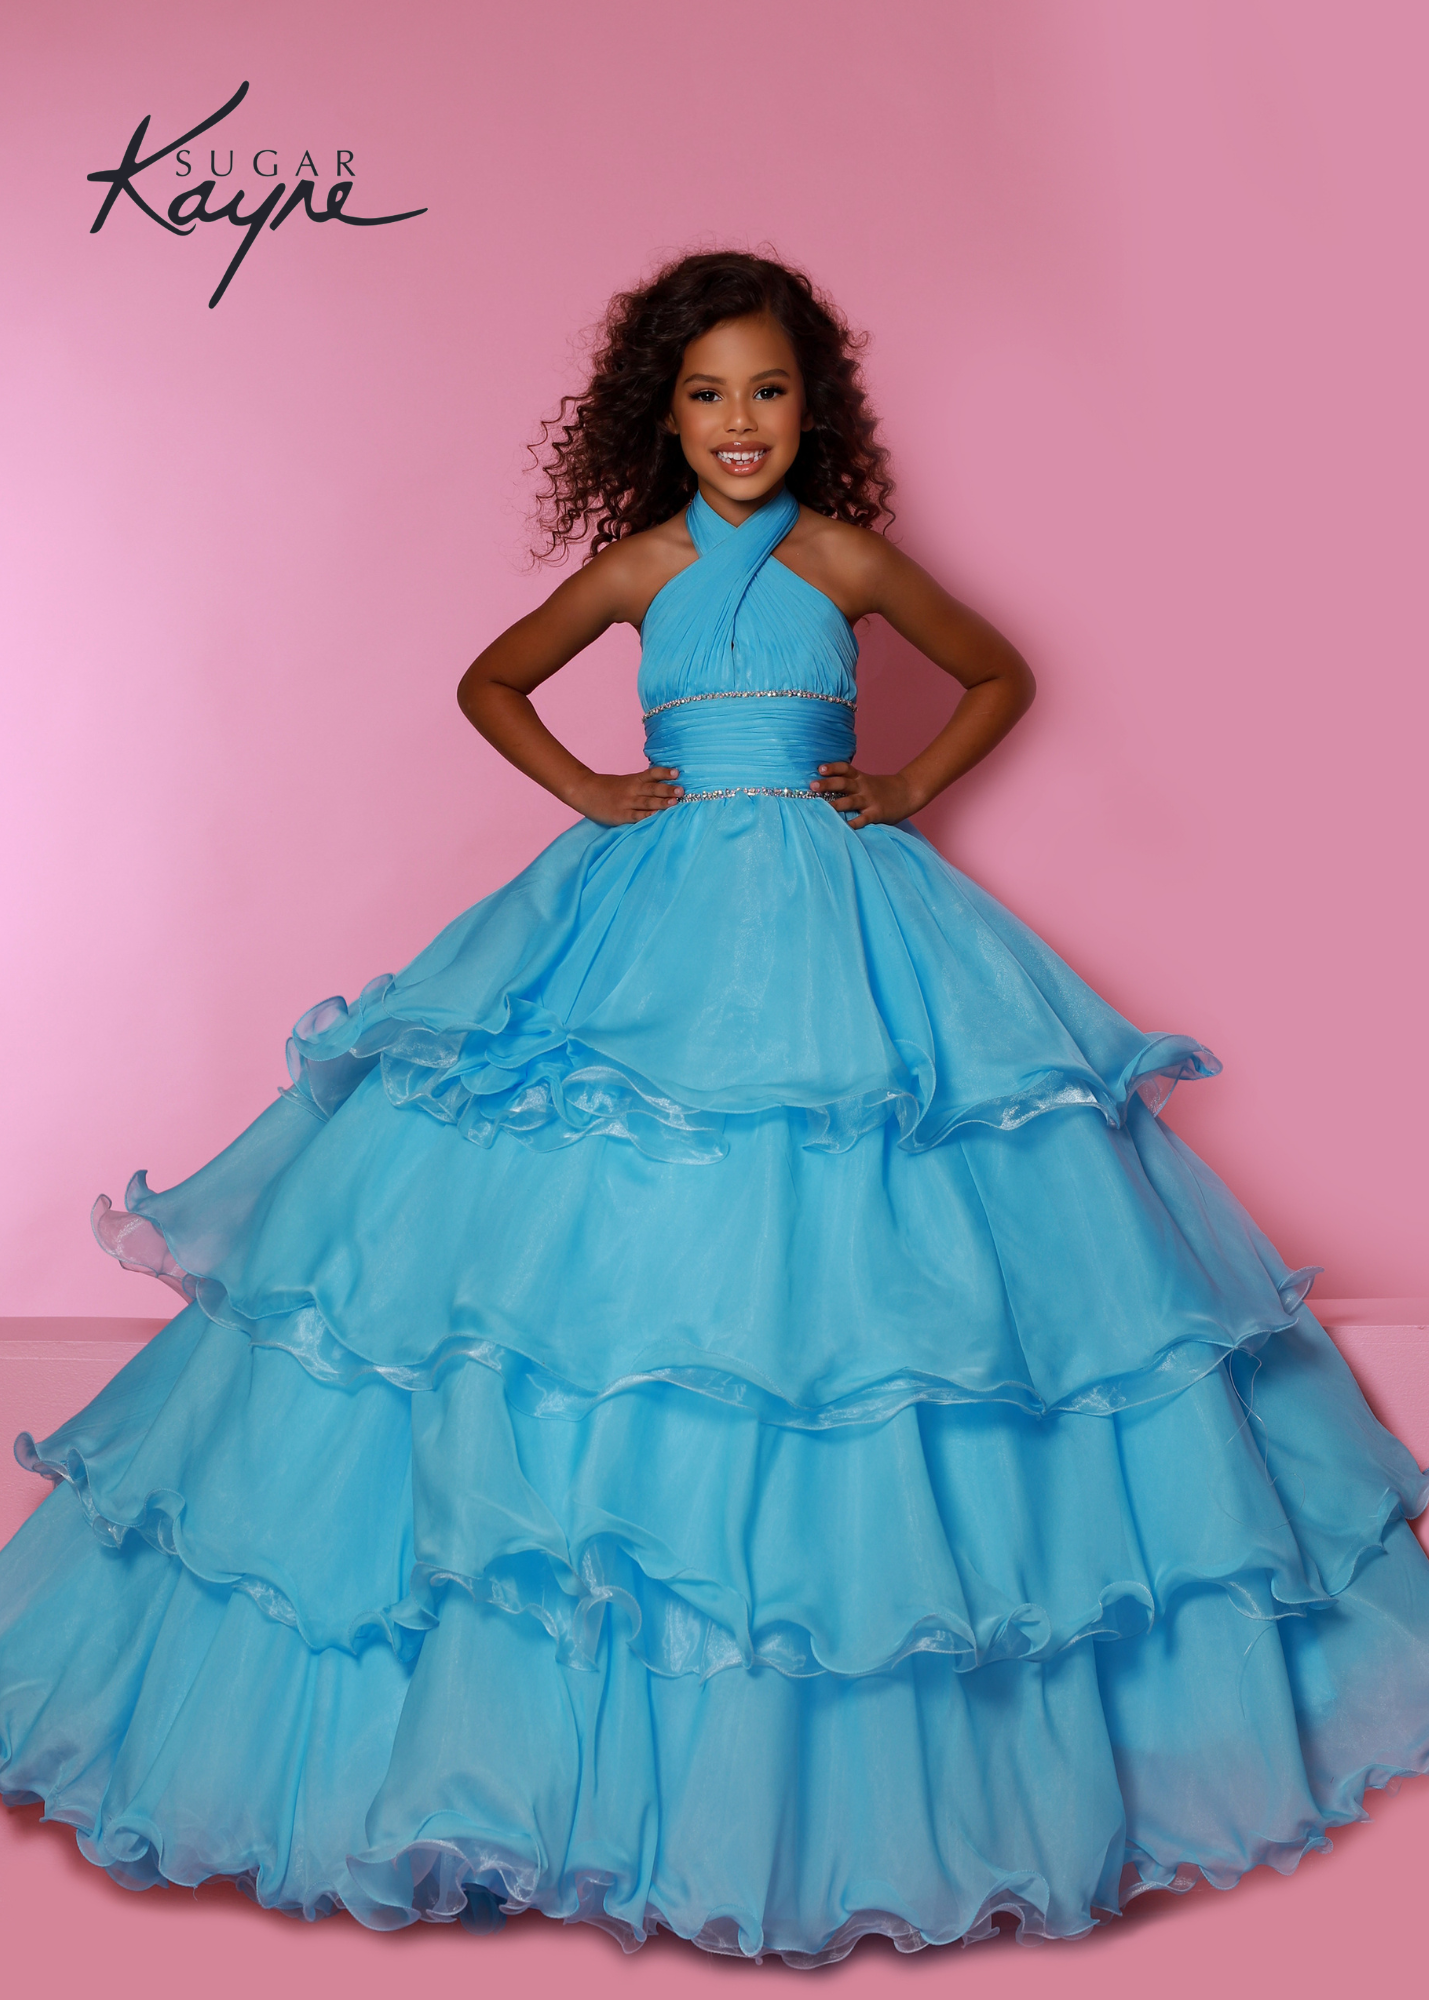 Sugar Kayne C305 Layer Girls Ruffle Pageant Ball Gown Cape Halter Formal Dress Oh s'cute!! This poly chiffon layered ballgown features a crisscross halter neckline with beaded trim along the waist. The train will float seamlessly across the stage, especially with the detachable cape.  Colors: Baby Blue, Lemon, White  Sizes: 2, 4, 6, 8, 10, 12, 14, 16  Fabric Poly Chiffon, Satin Lining